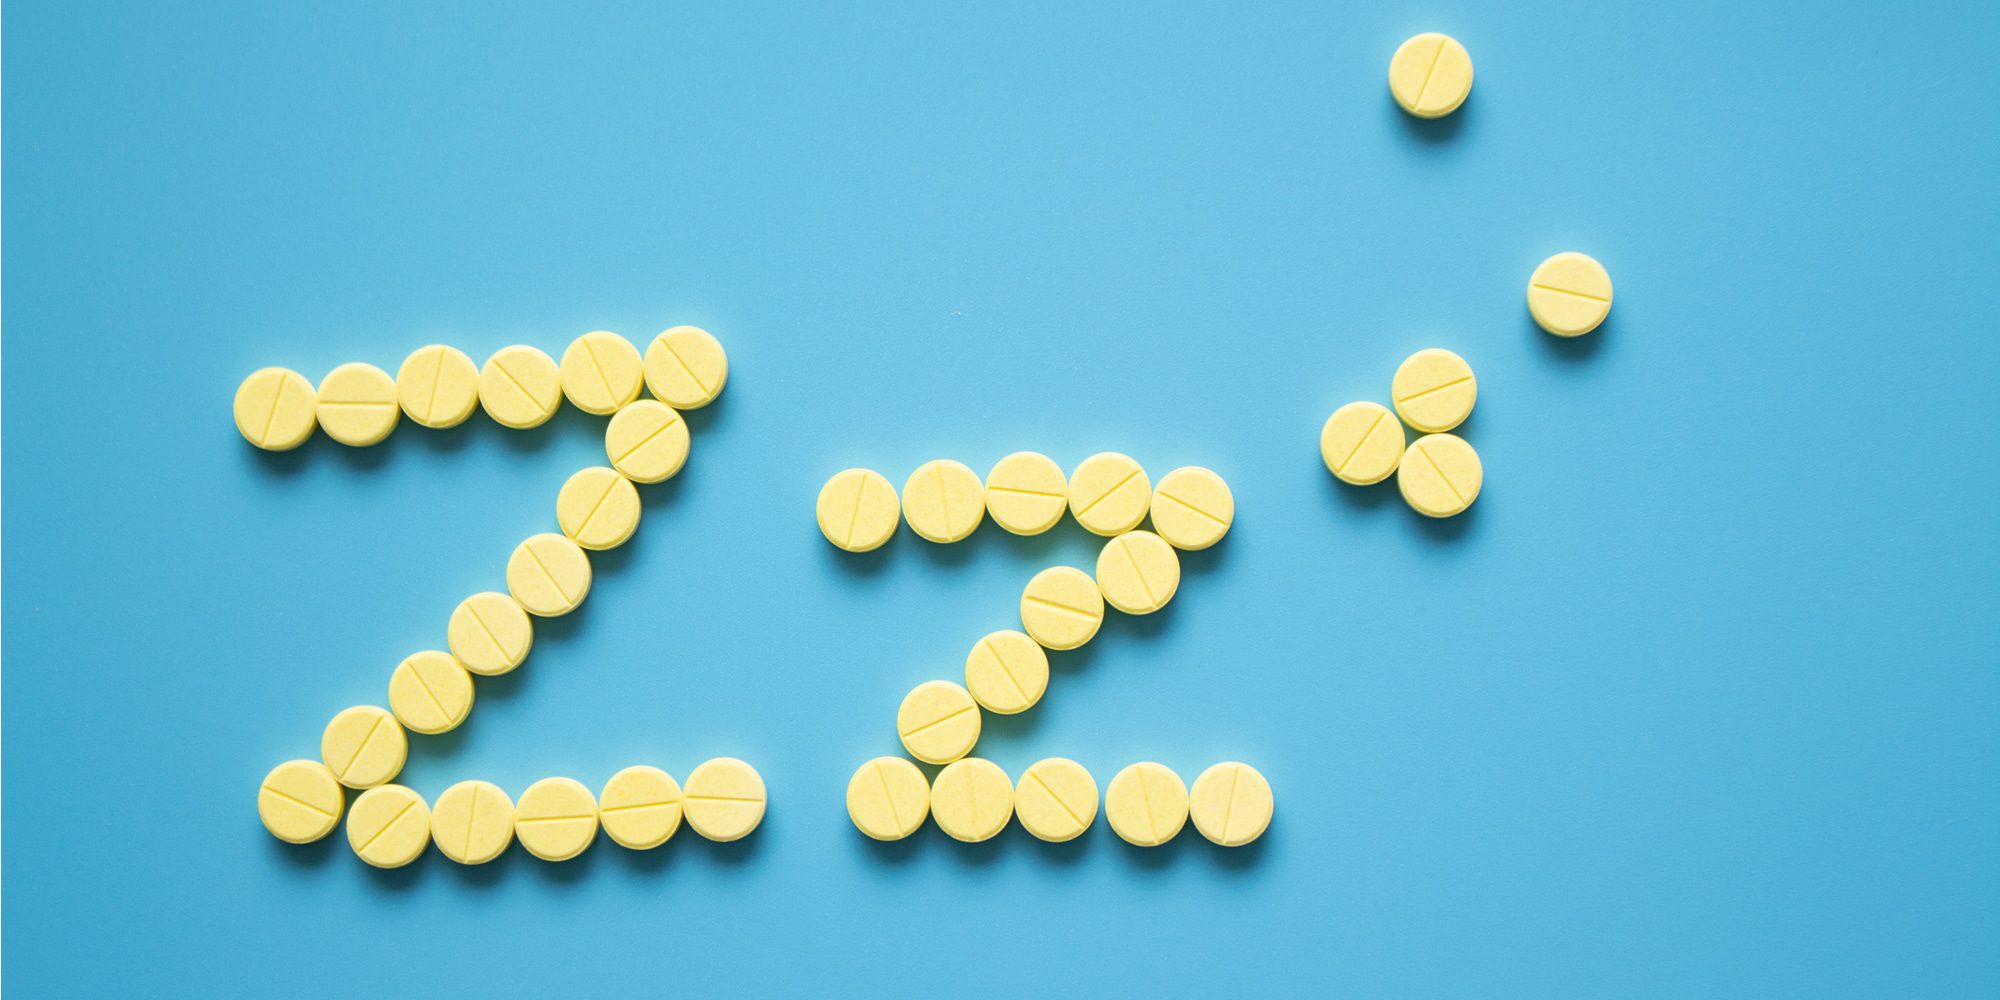 Are Z-Drugs Safe? The Dangers of Sleeping Pill Addiction